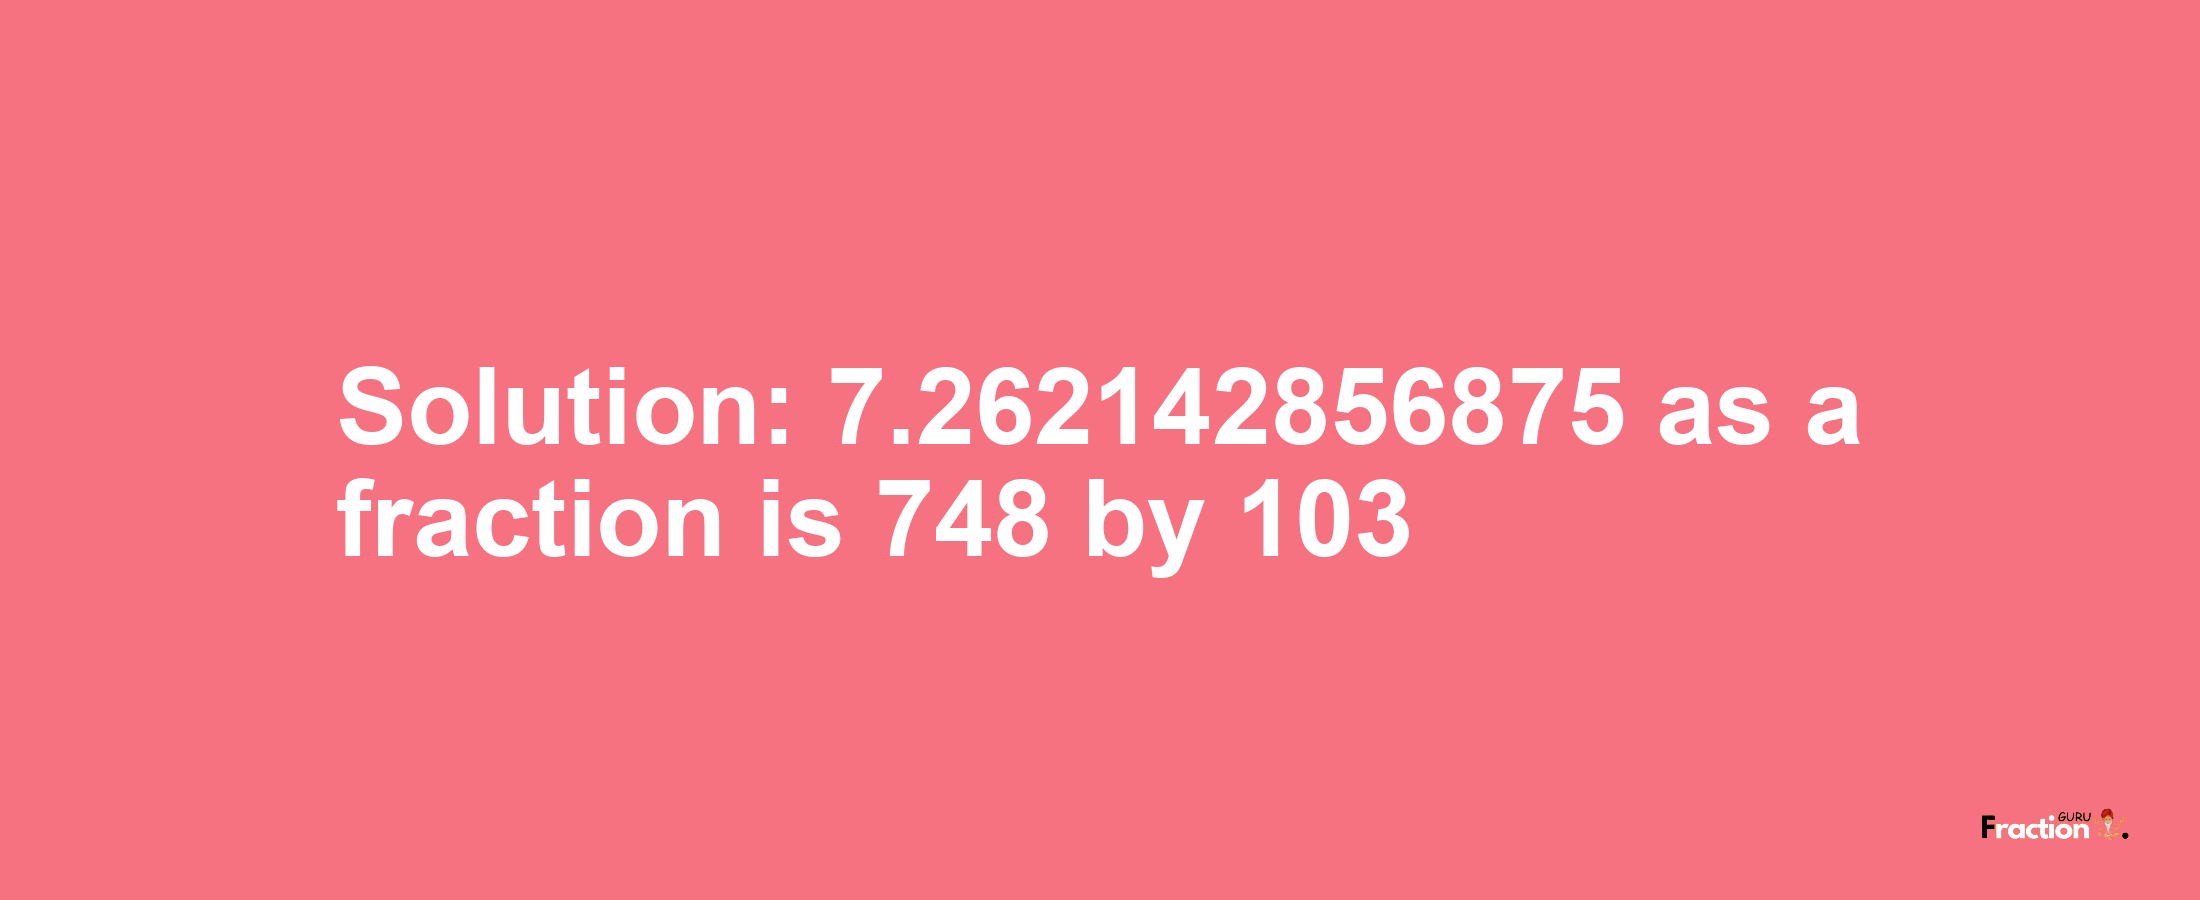 Solution:7.262142856875 as a fraction is 748/103